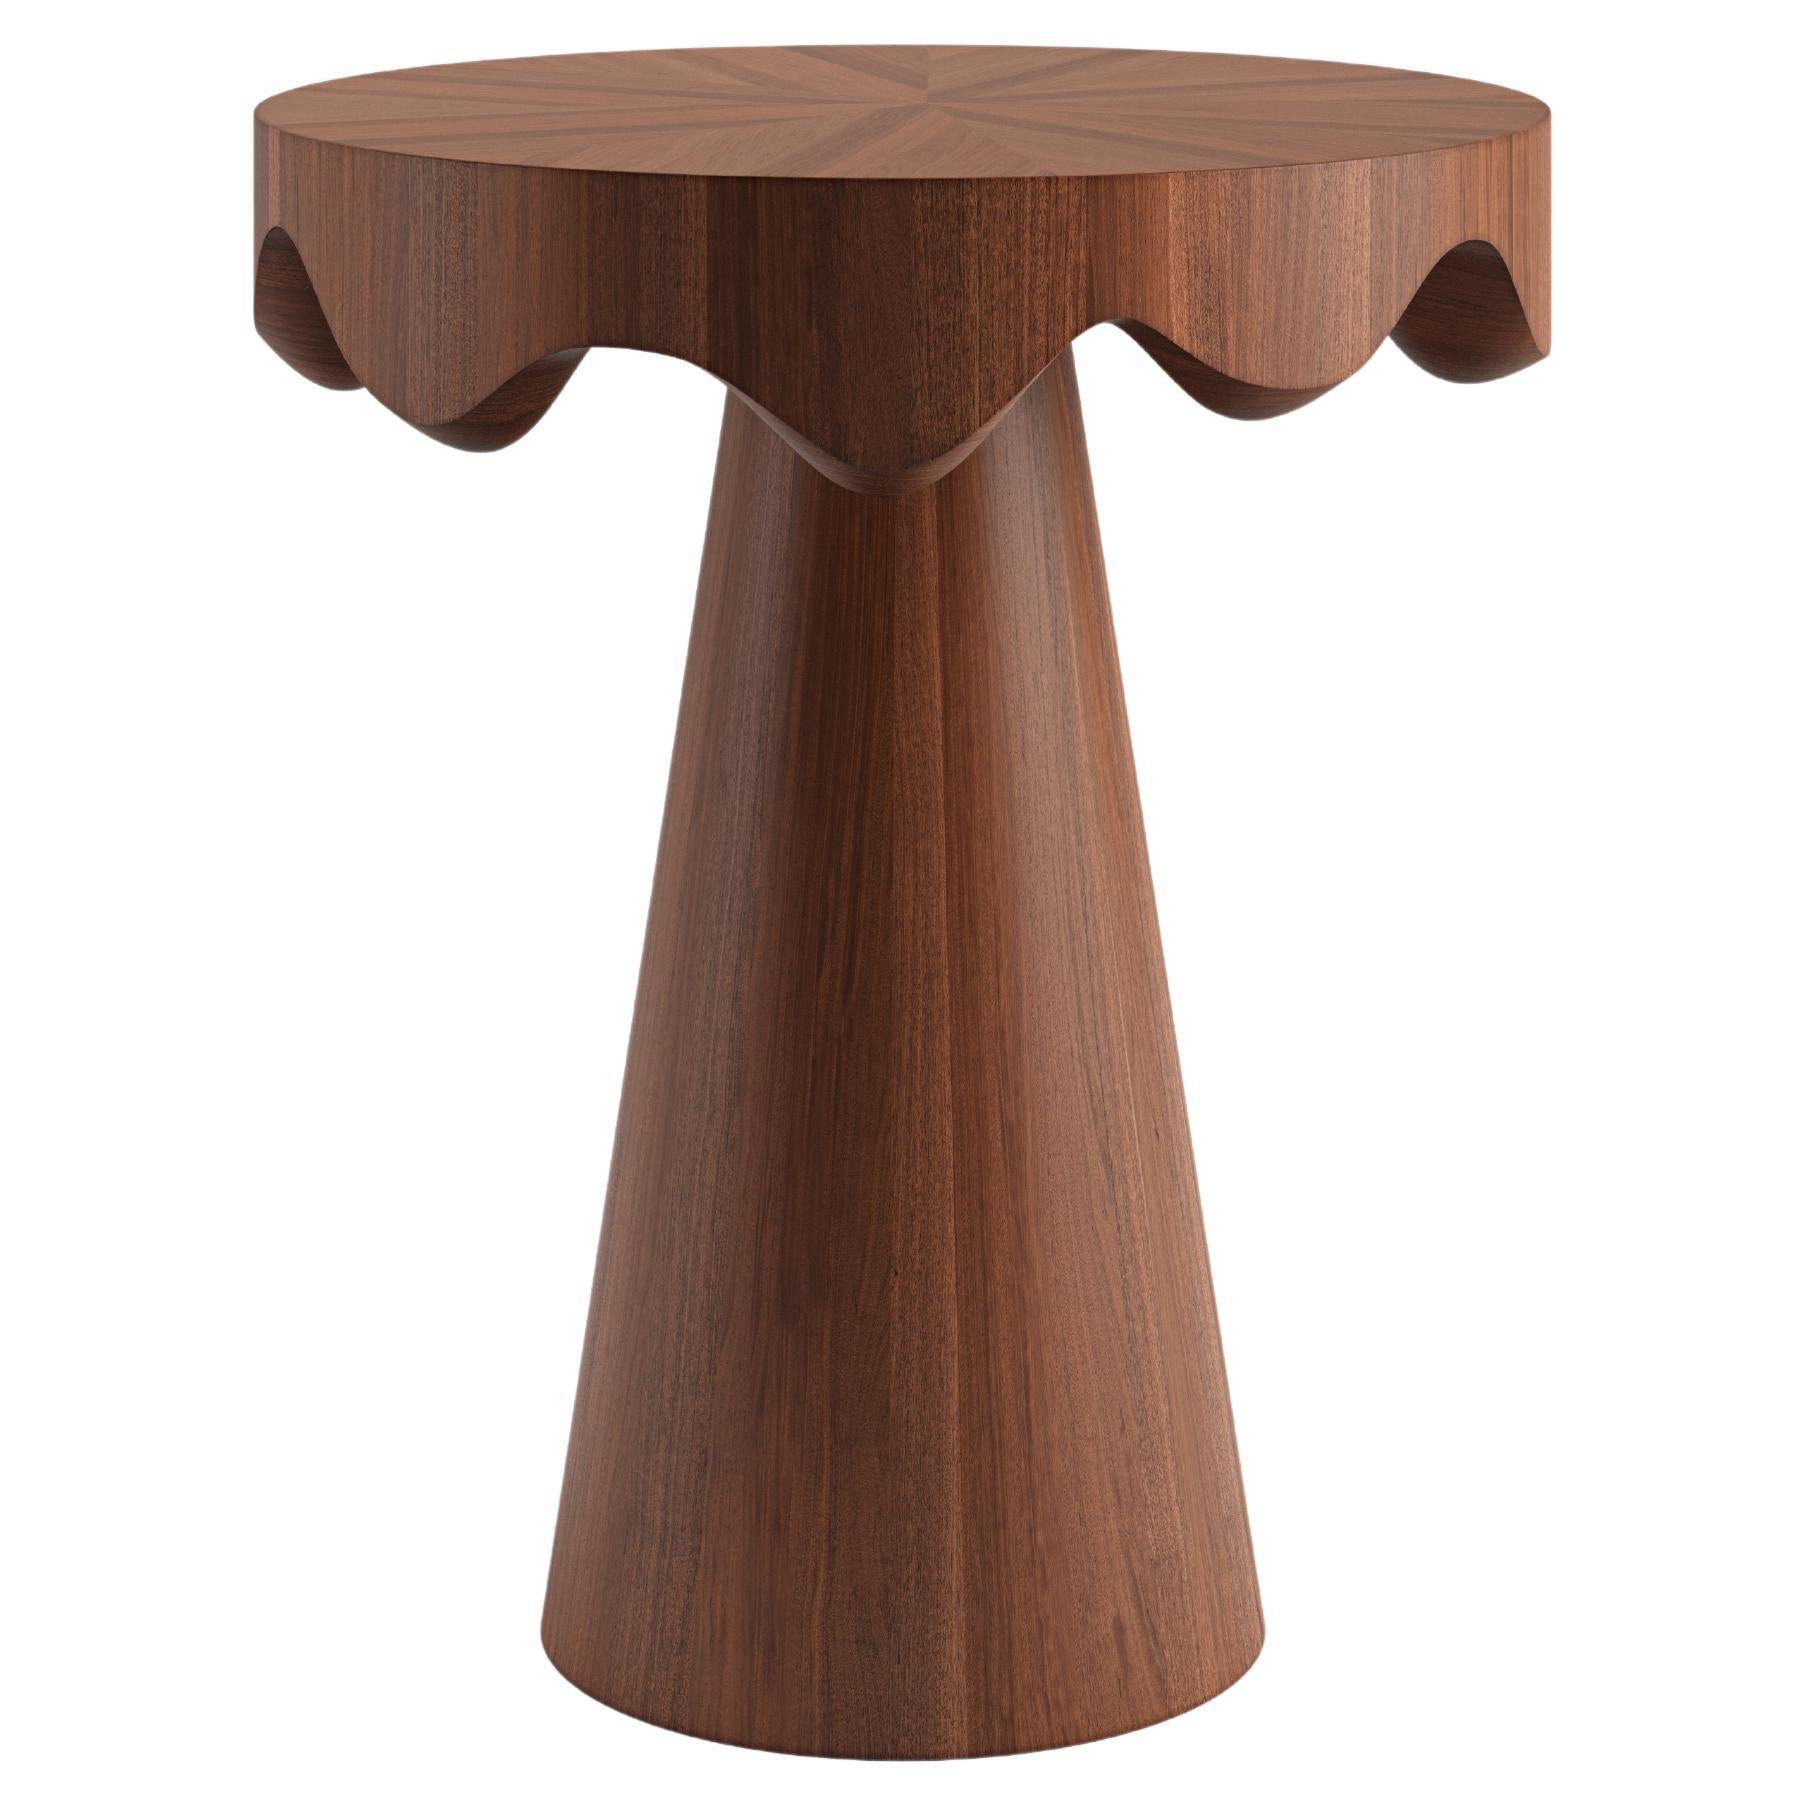 Dripotlé Mahogany Side Table by T. Woon